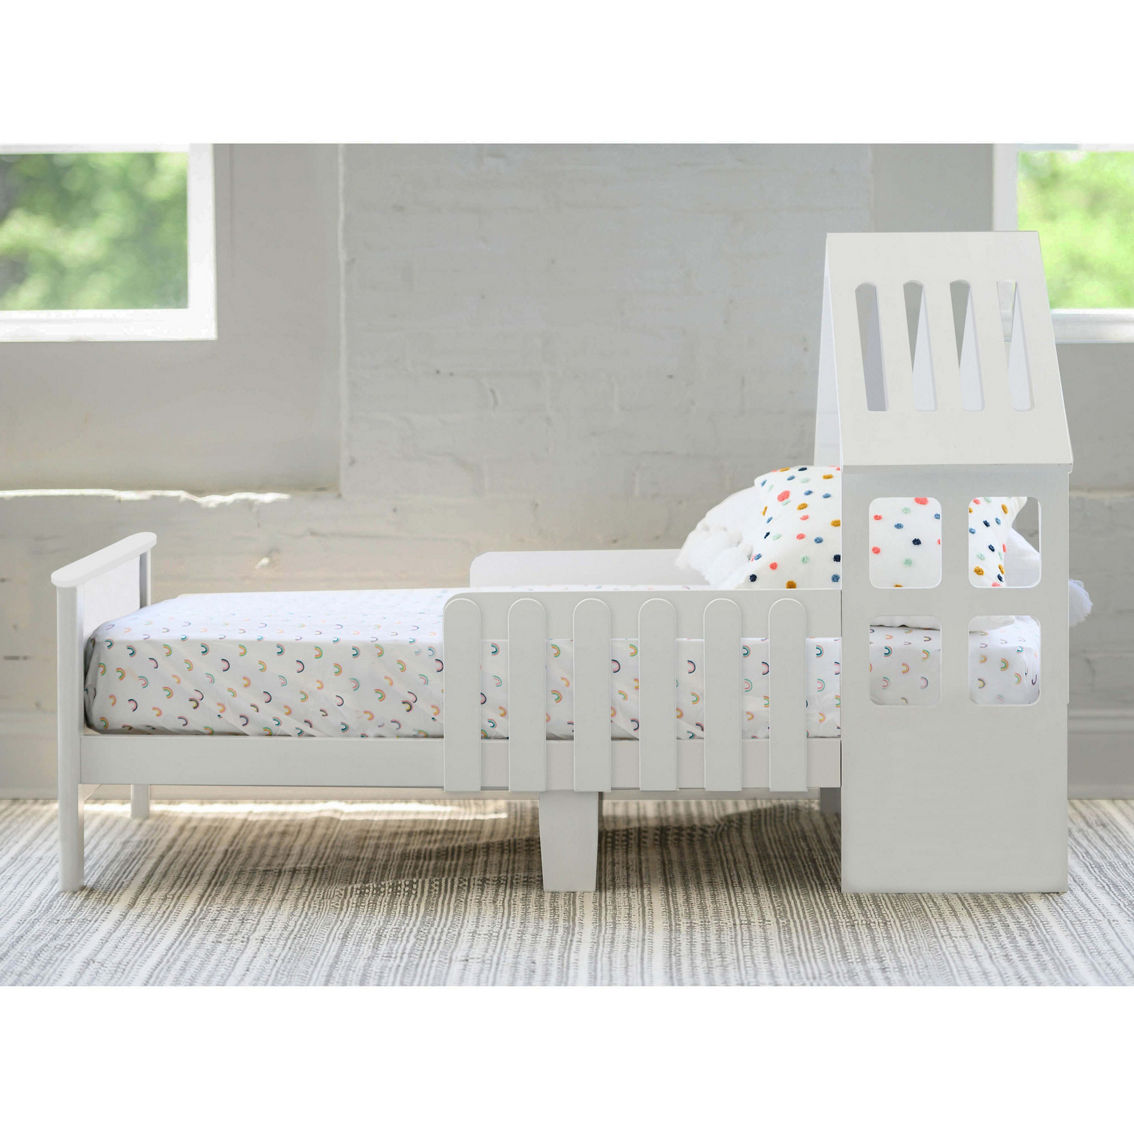 Little Partners Lil House Toddler Bed - Image 2 of 5